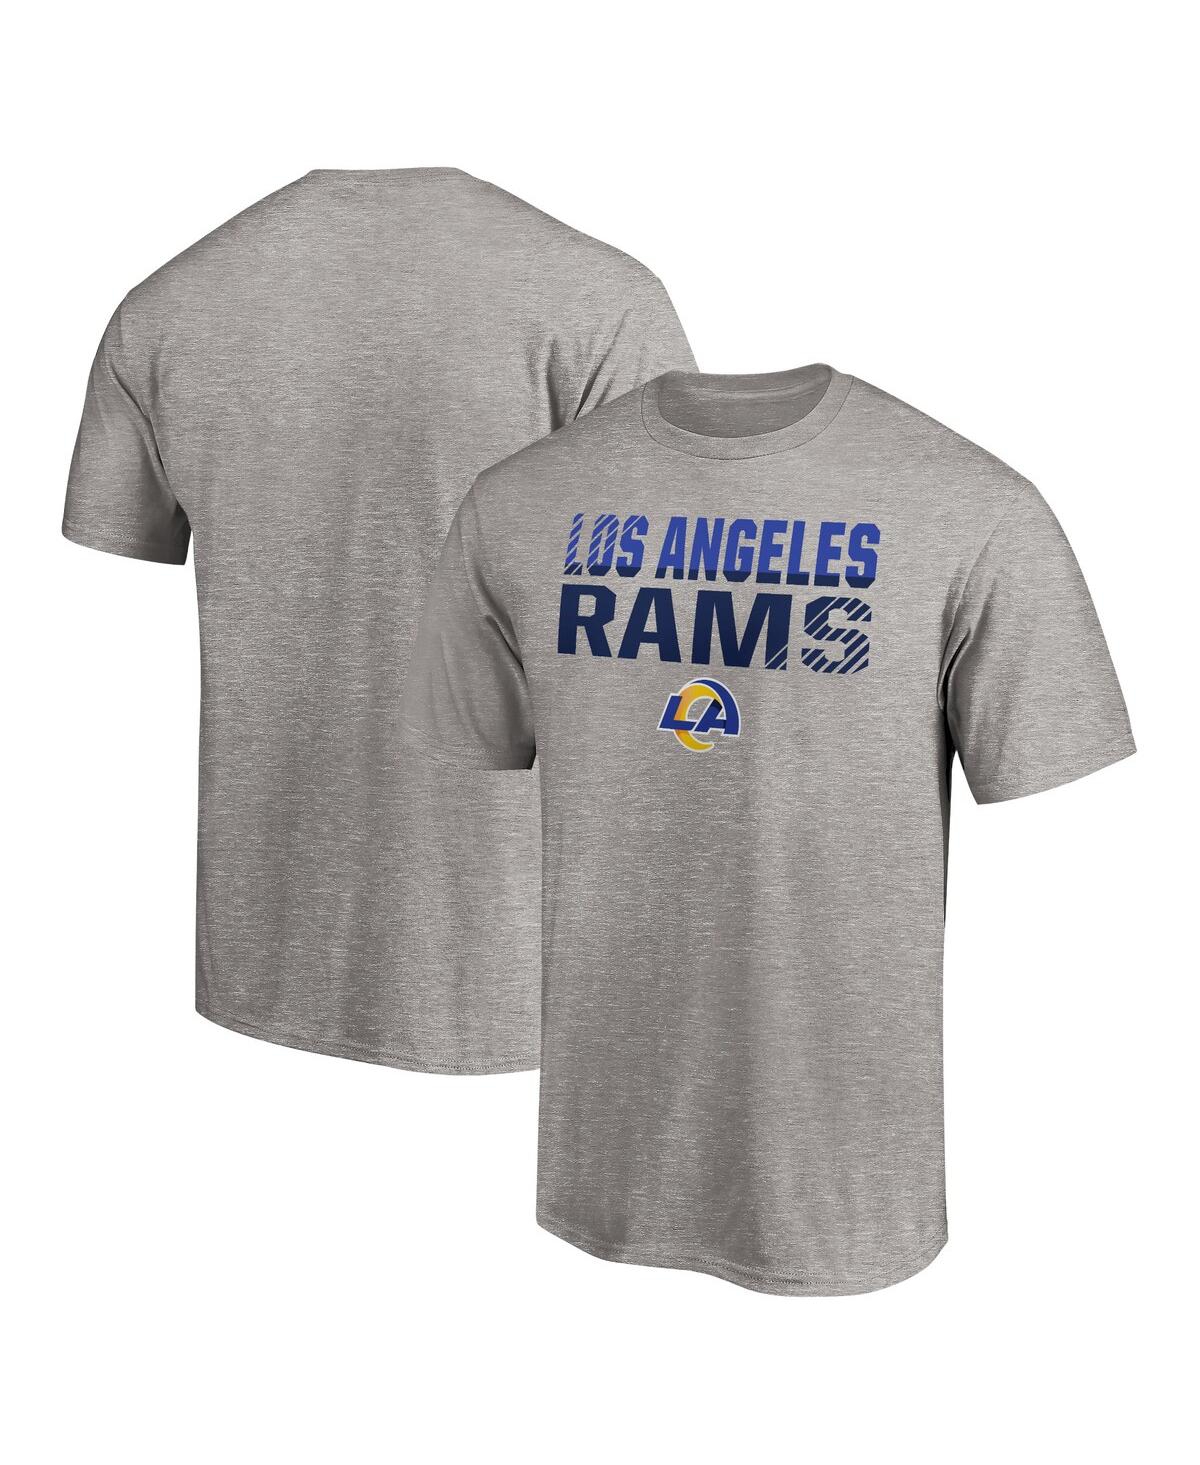 Fanatics Men's  Heathered Gray Los Angeles Rams Big And Tall Fade Out Team T-shirt